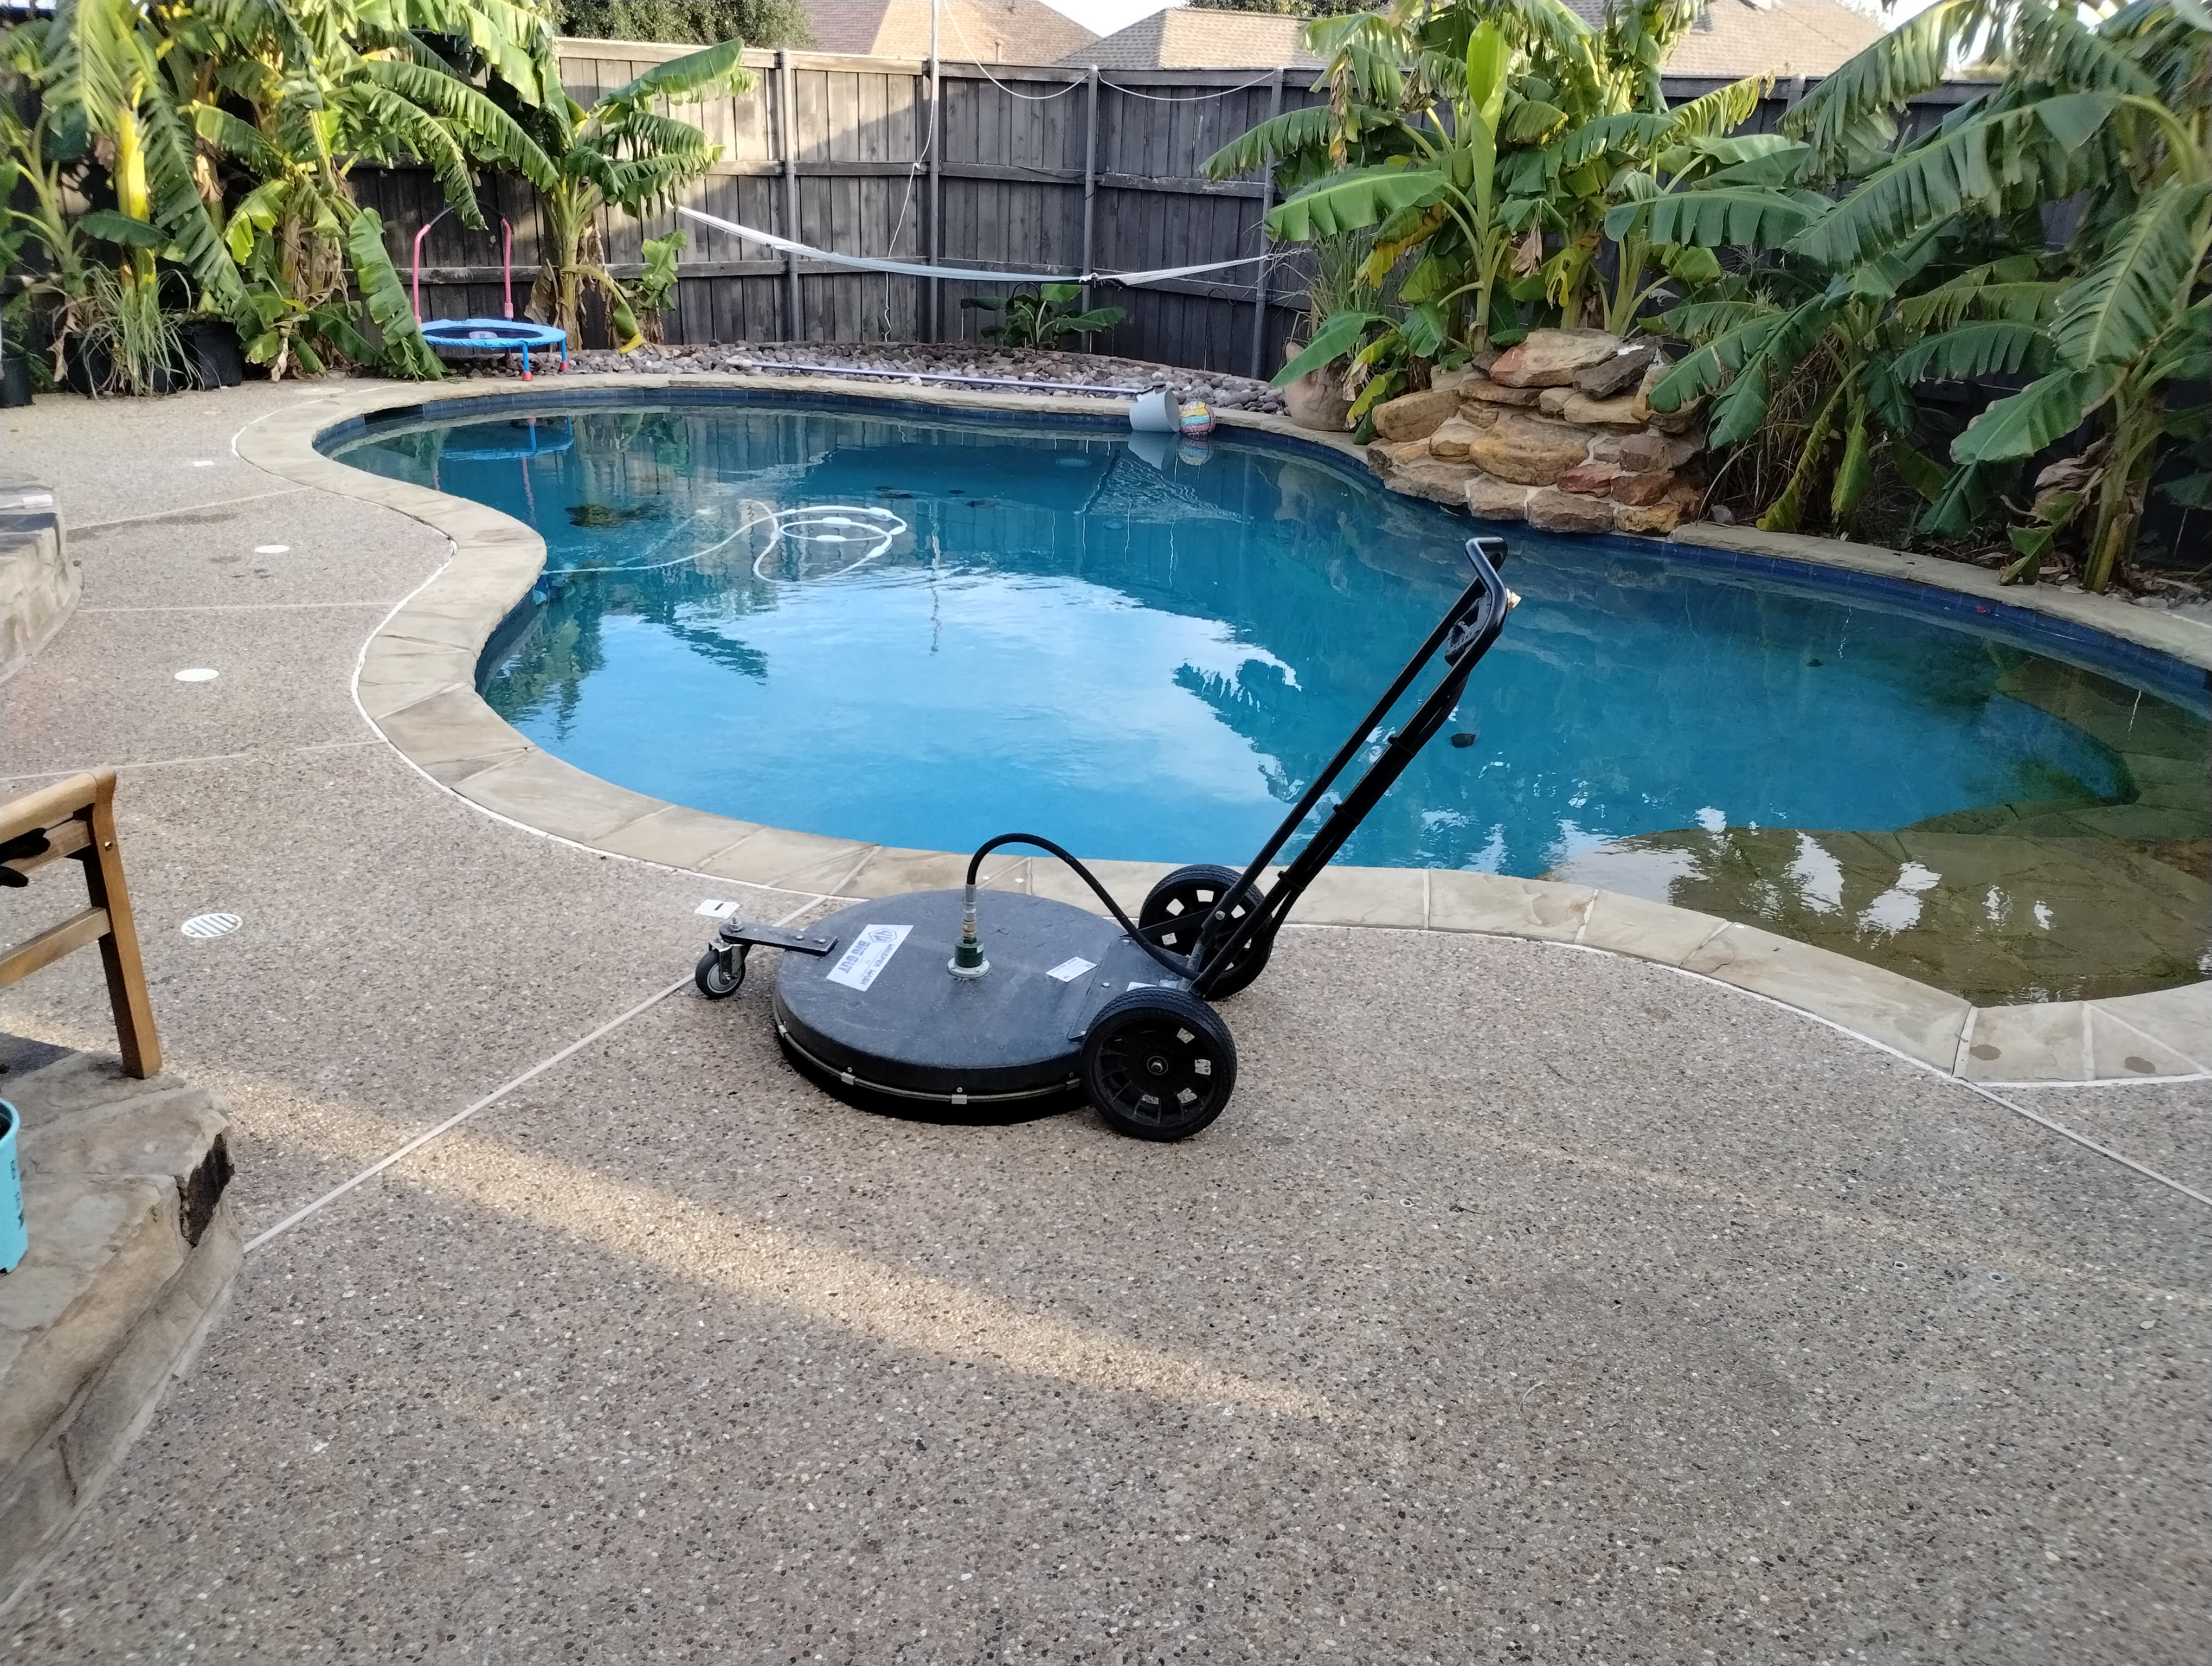 From the Golden Steps to the shimmering pool, surfaces shine in Wylie, Texas!